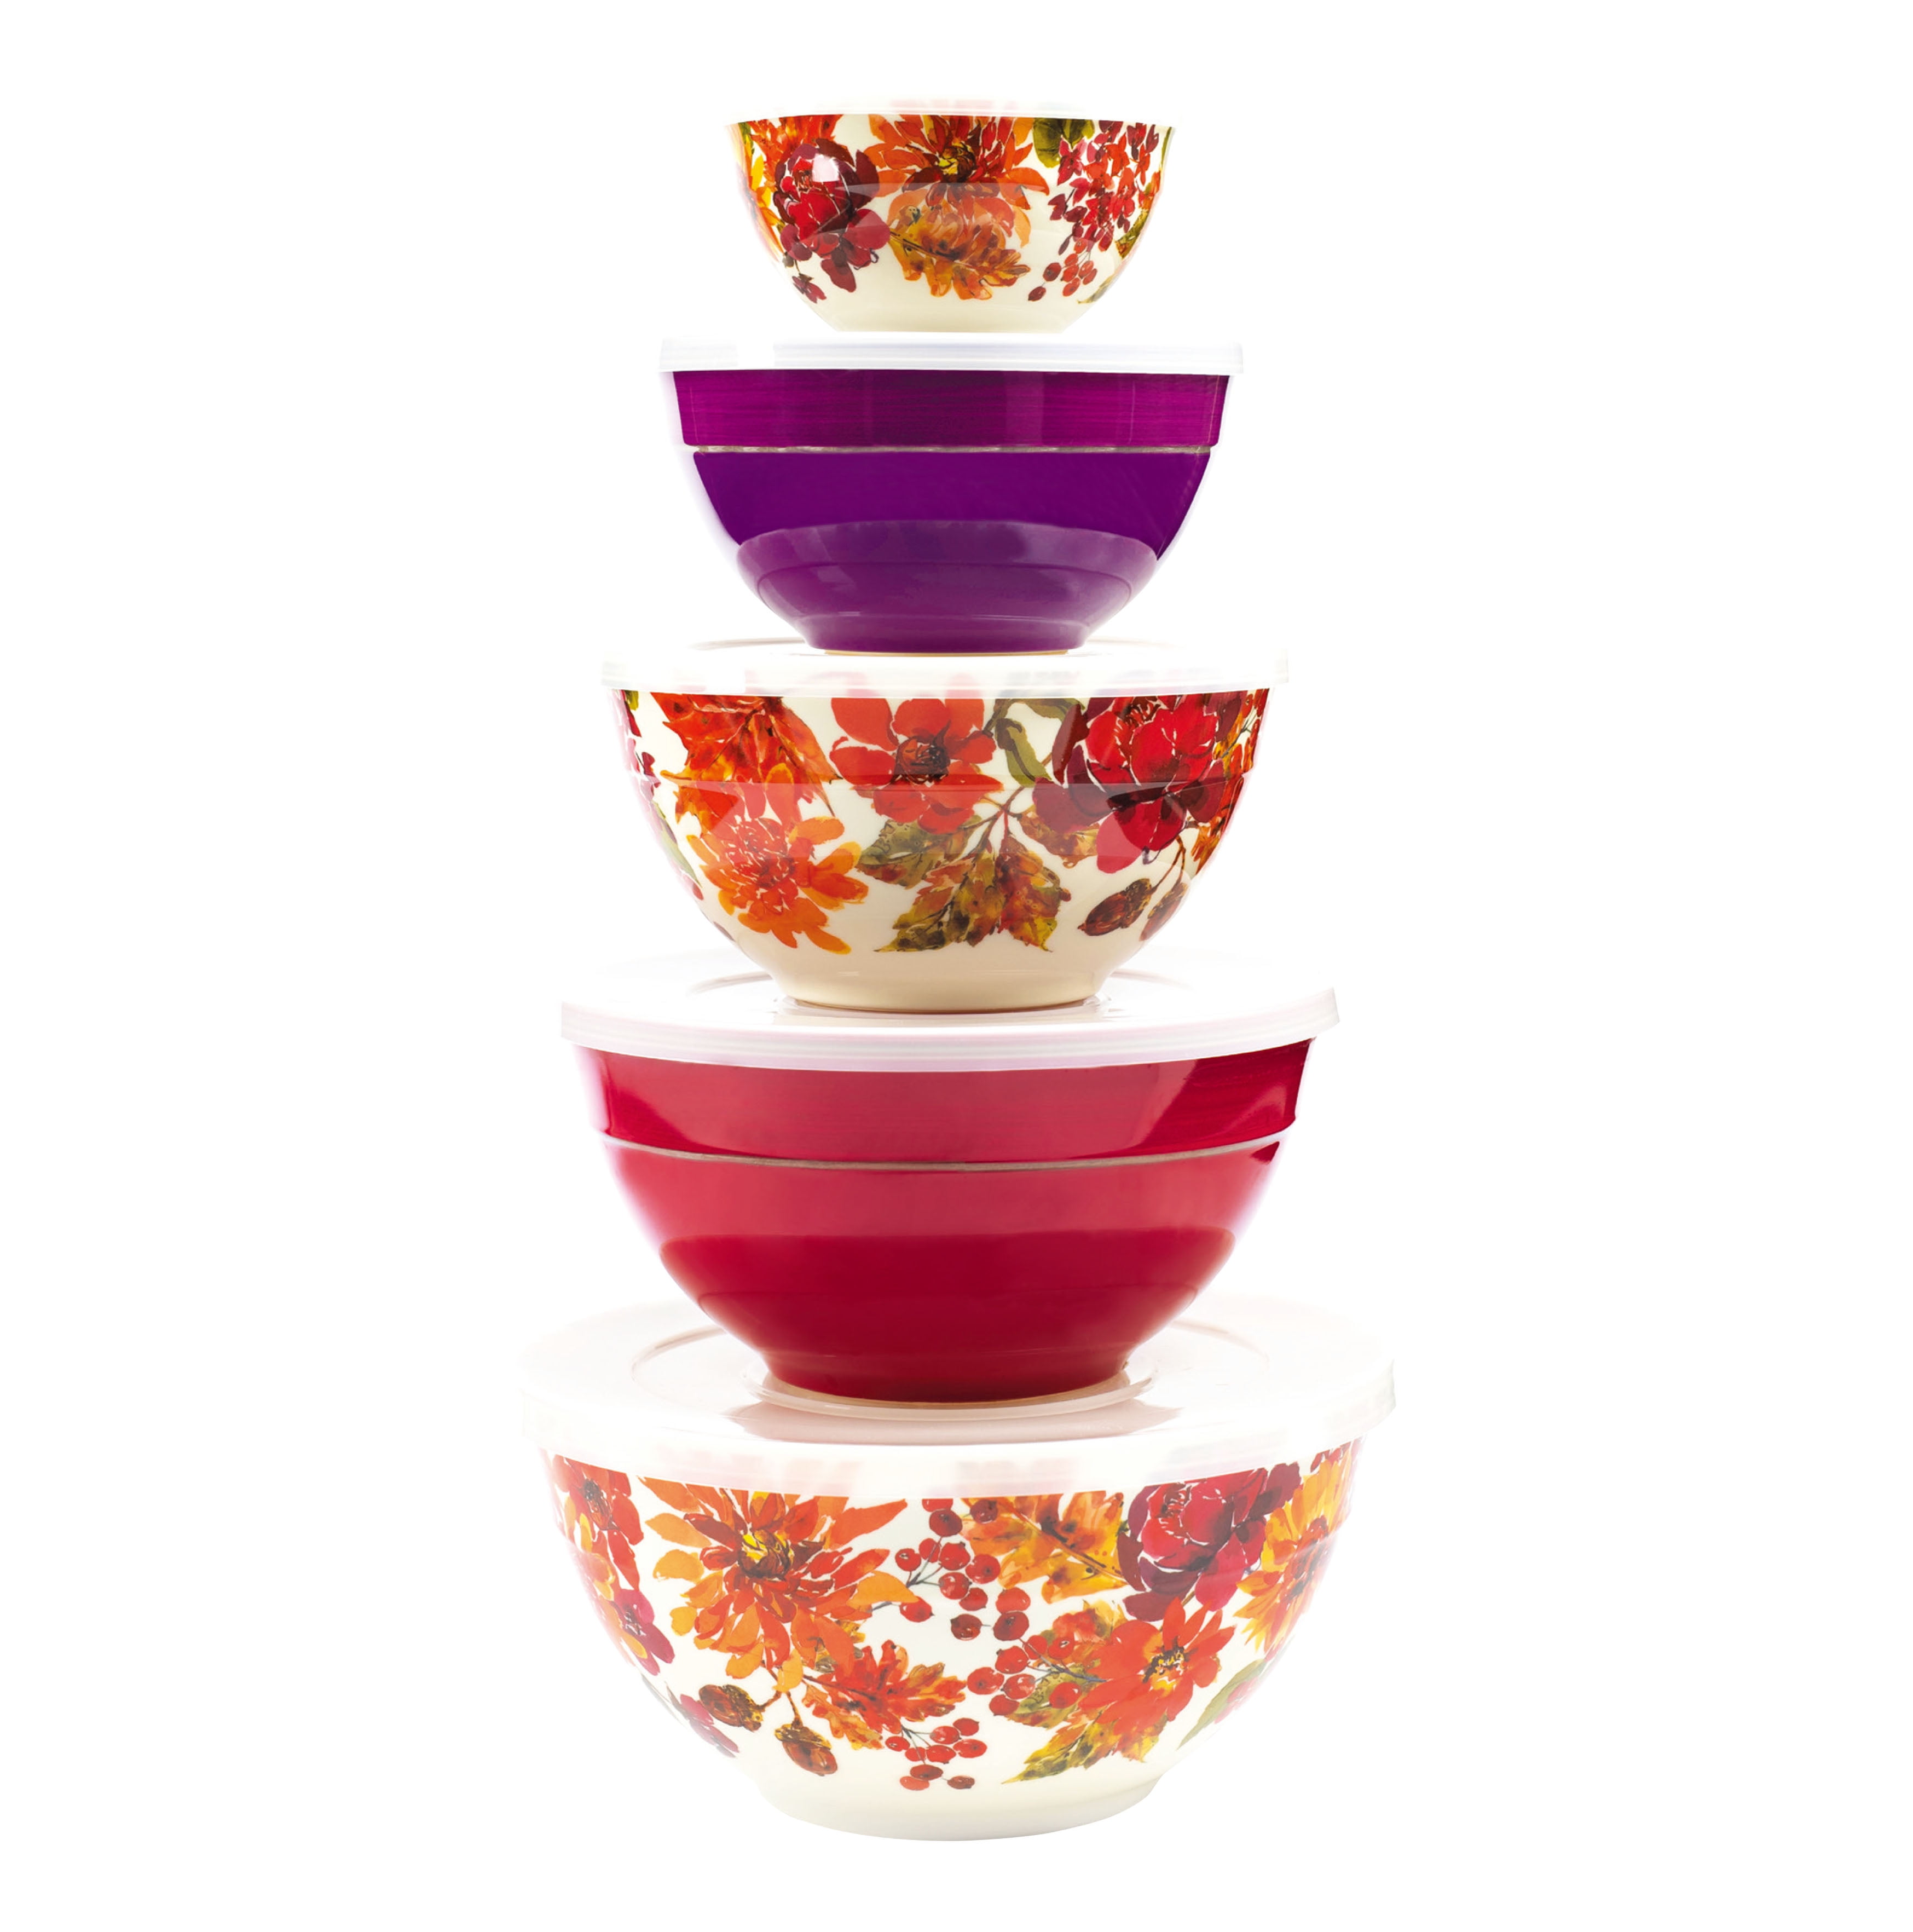 10pc Glass Mixing Bowls - Made by Design